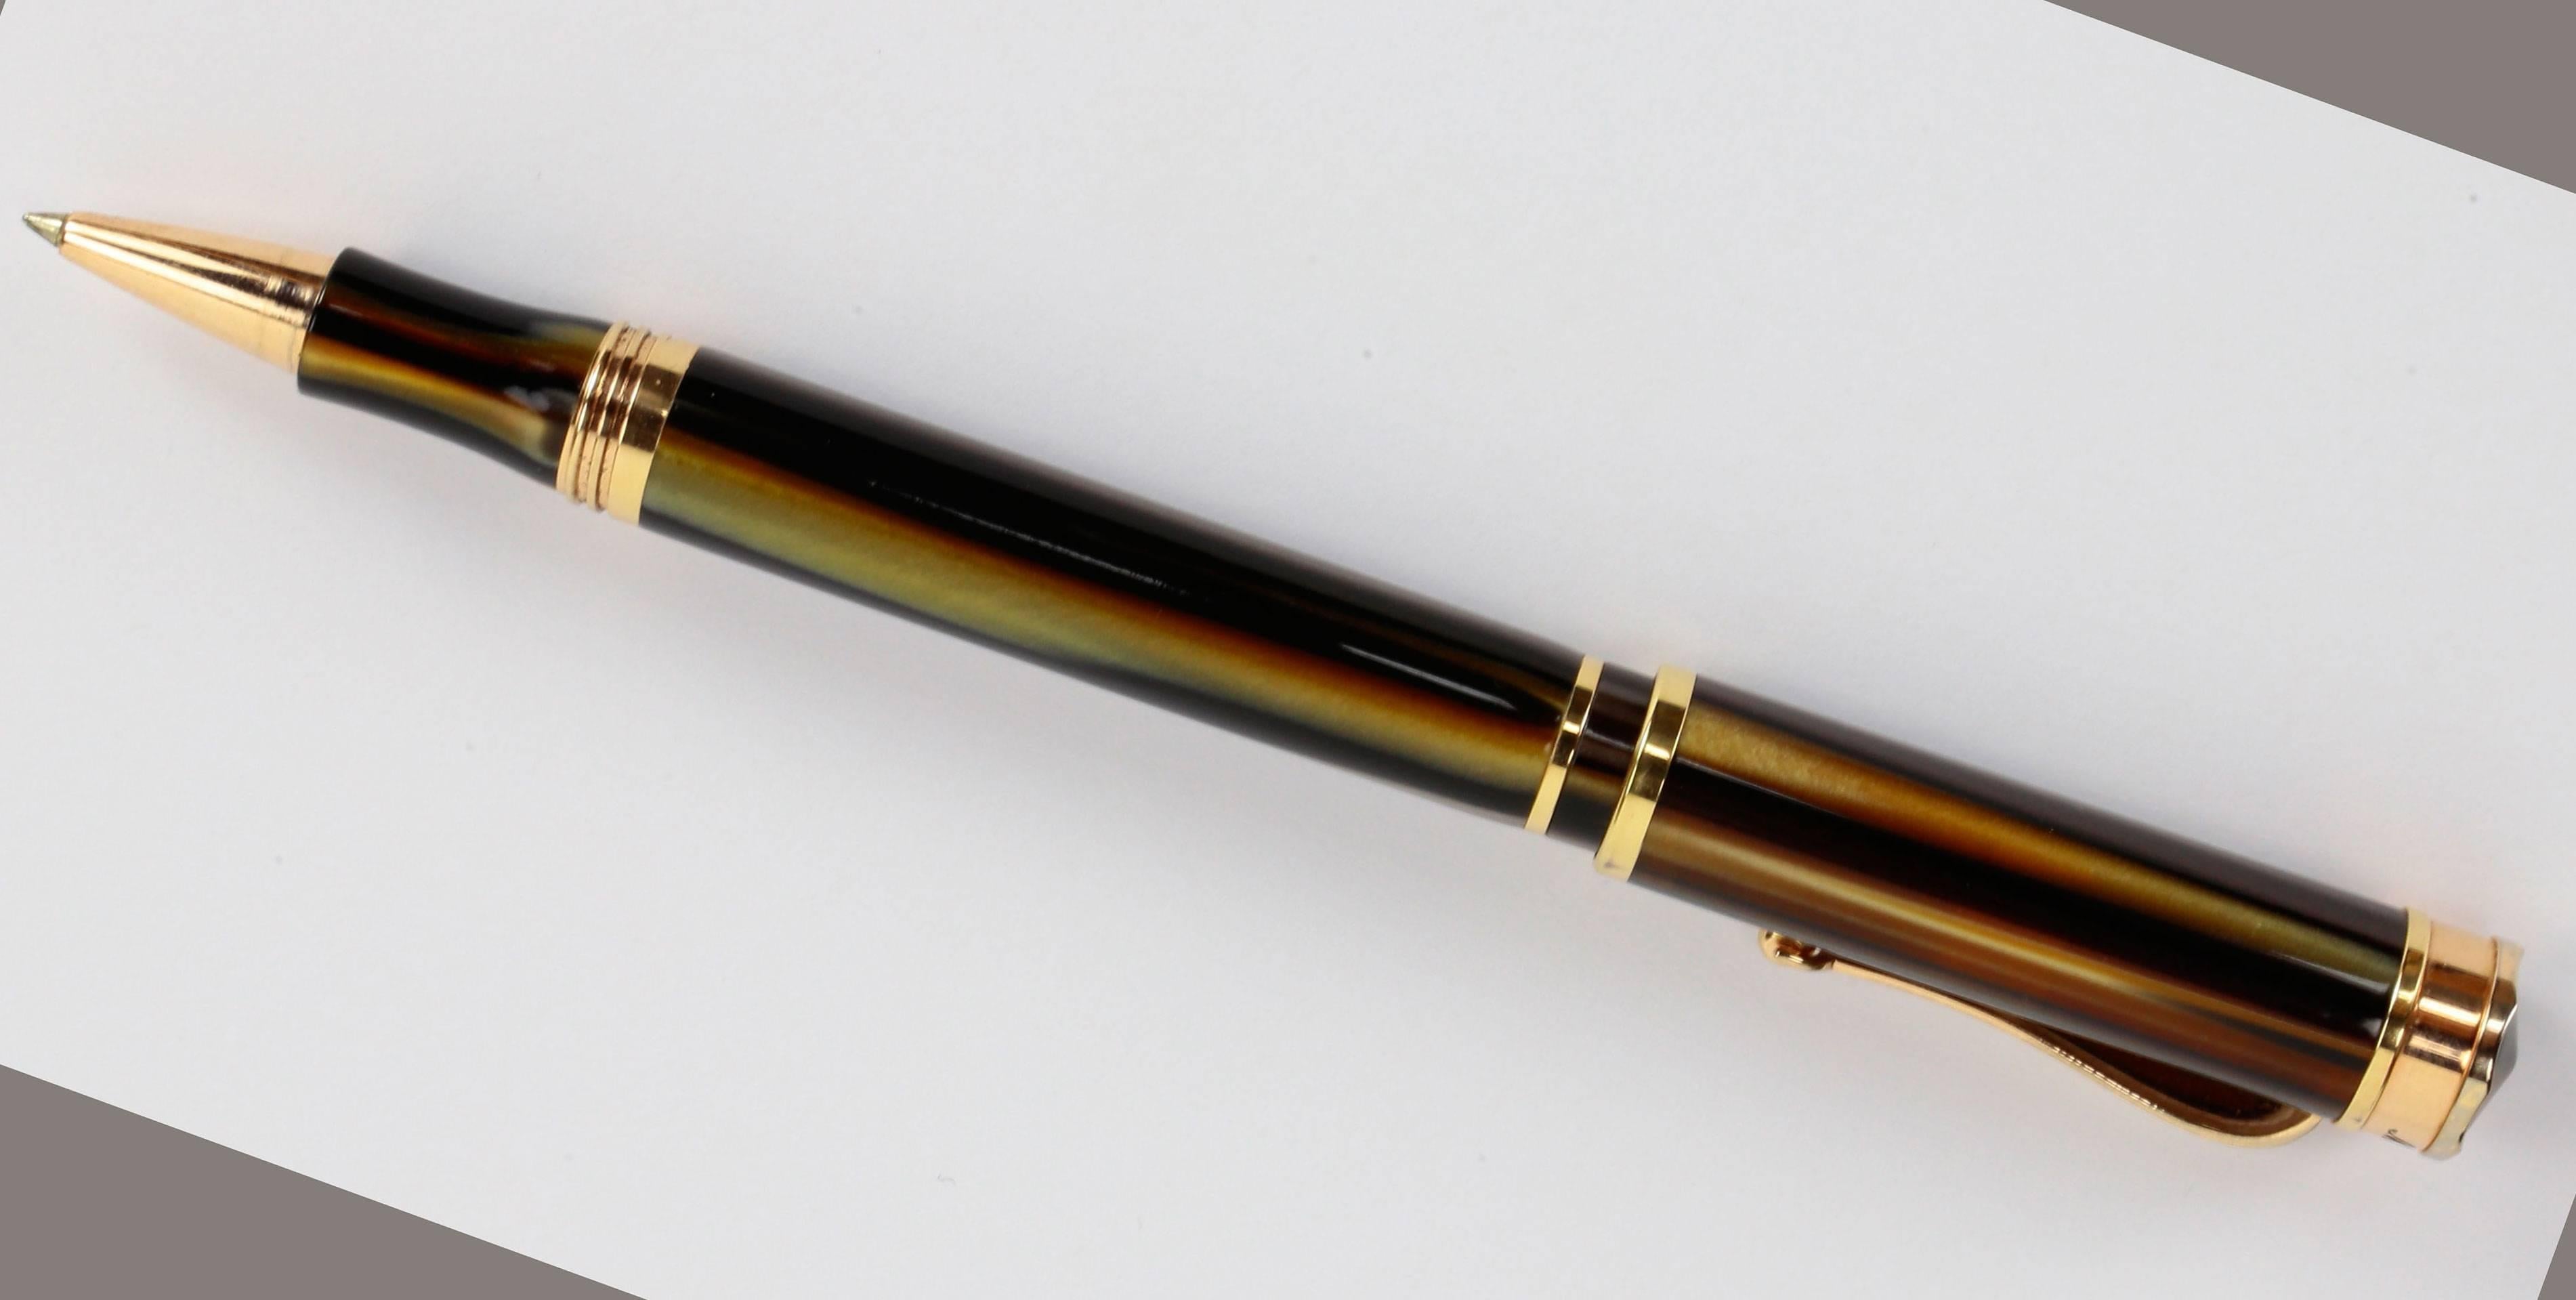 For those of us who still relish the pleasure of writing, we present the outstanding Ducale Montegrappa Italia fine writing instrument; distinctive rich brown turquoise resin finish gold trim; screw on cap; signed: Montegrappa; in original quality